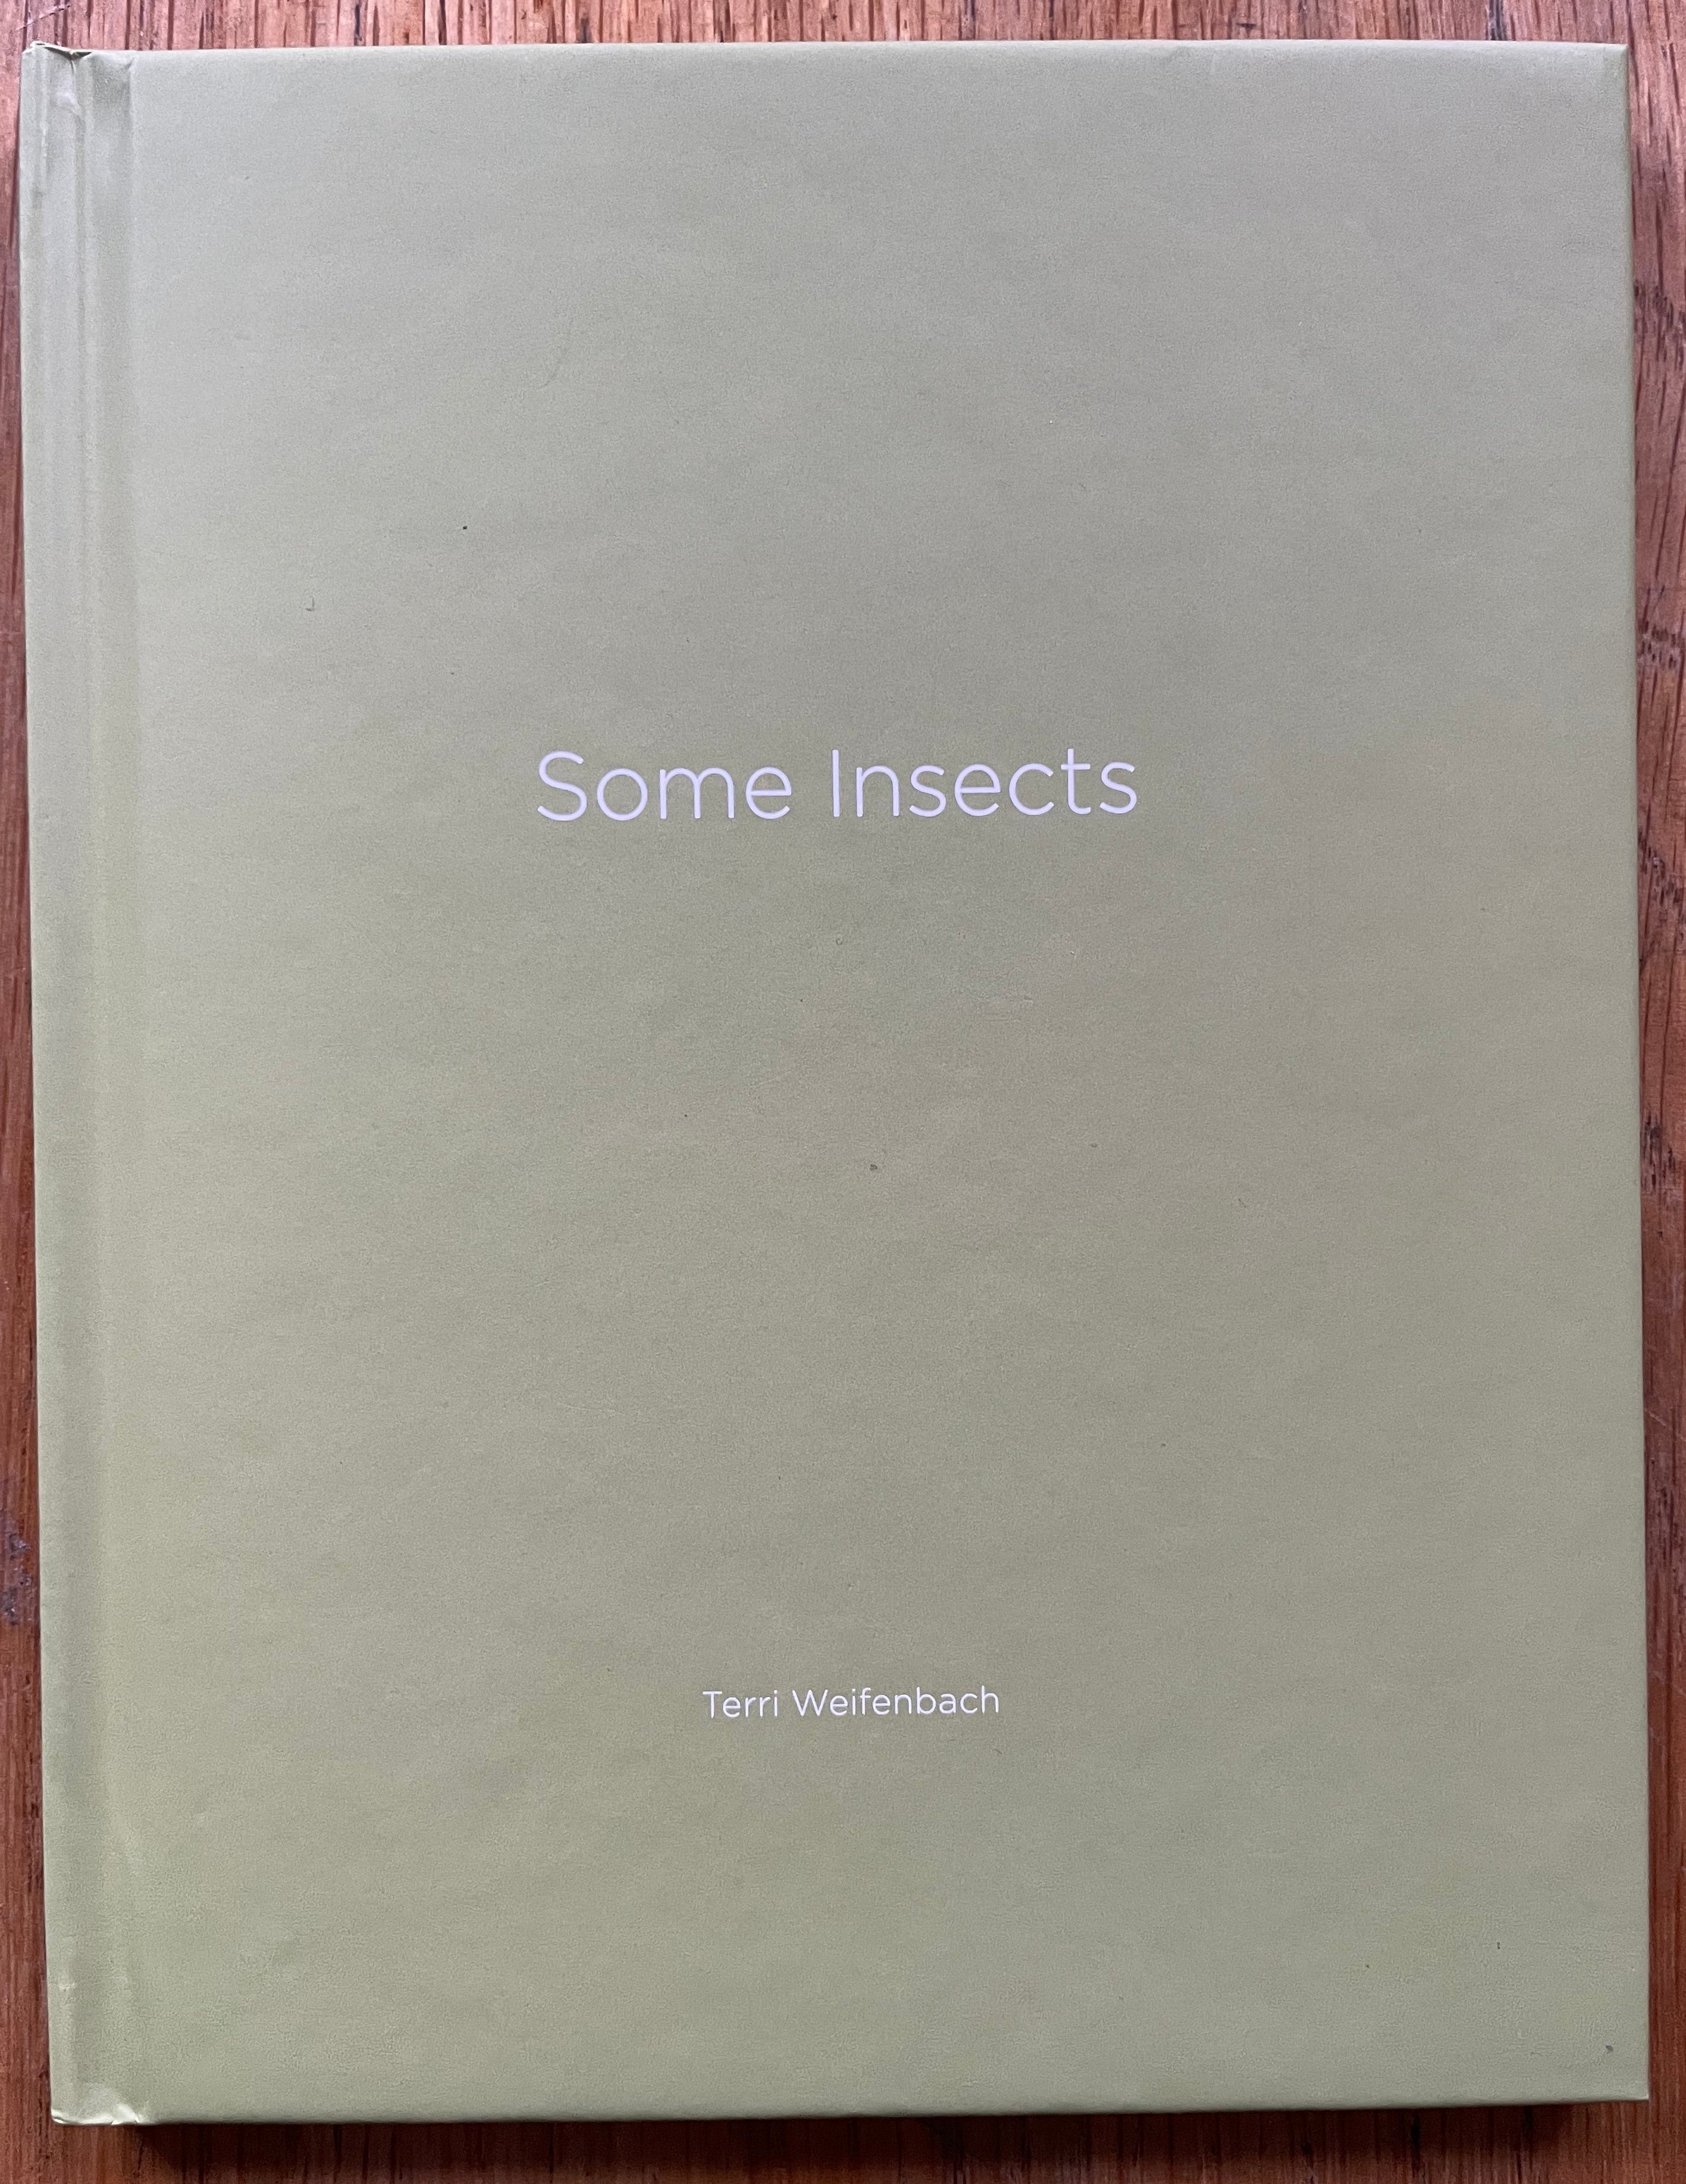 Buy Some Insects (One Picture Book) Terri Weifenbach with print 